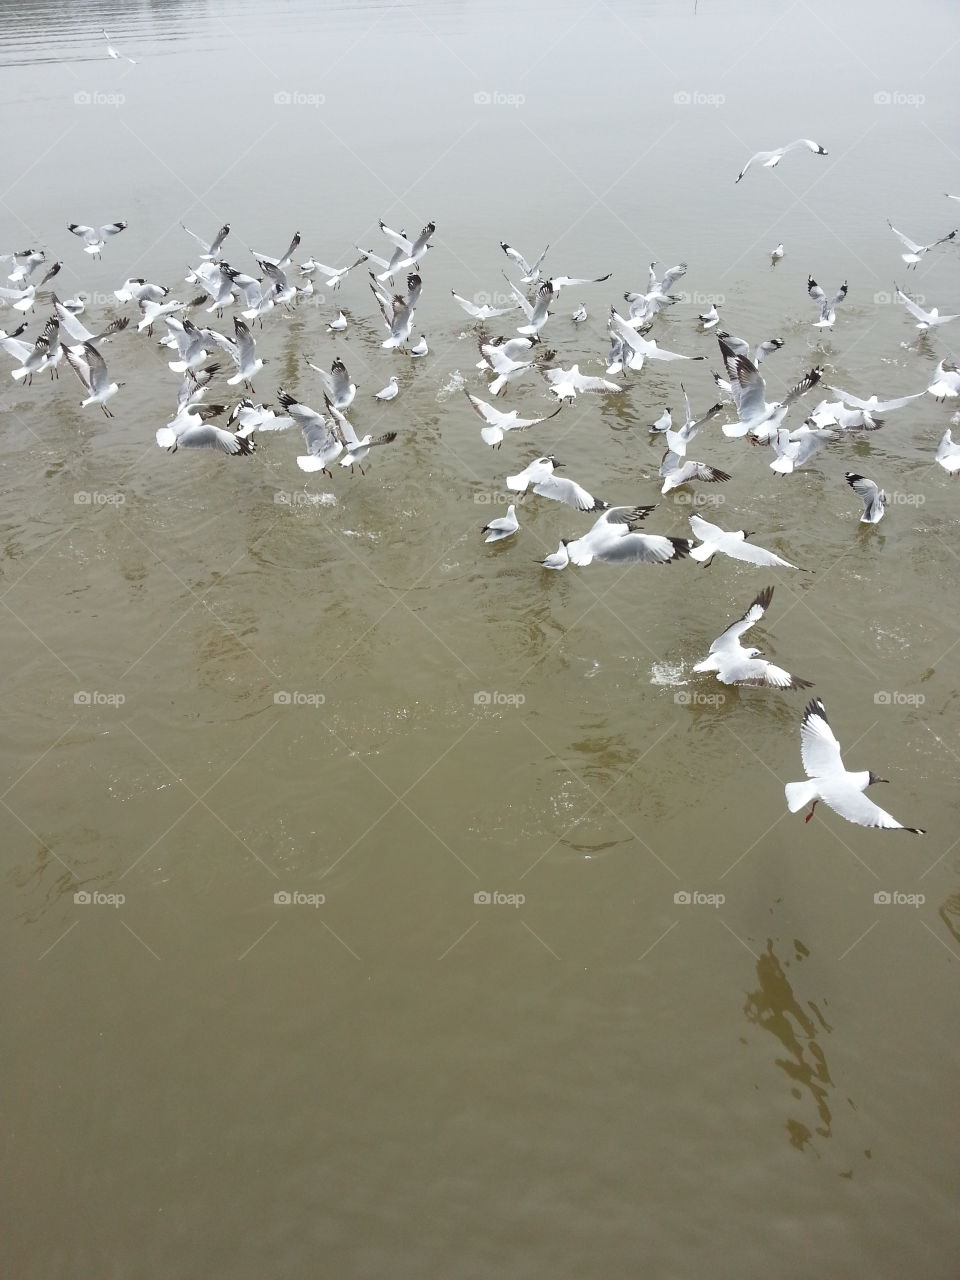 Seagulls are flying with their joyful whistles due to the people feed them.